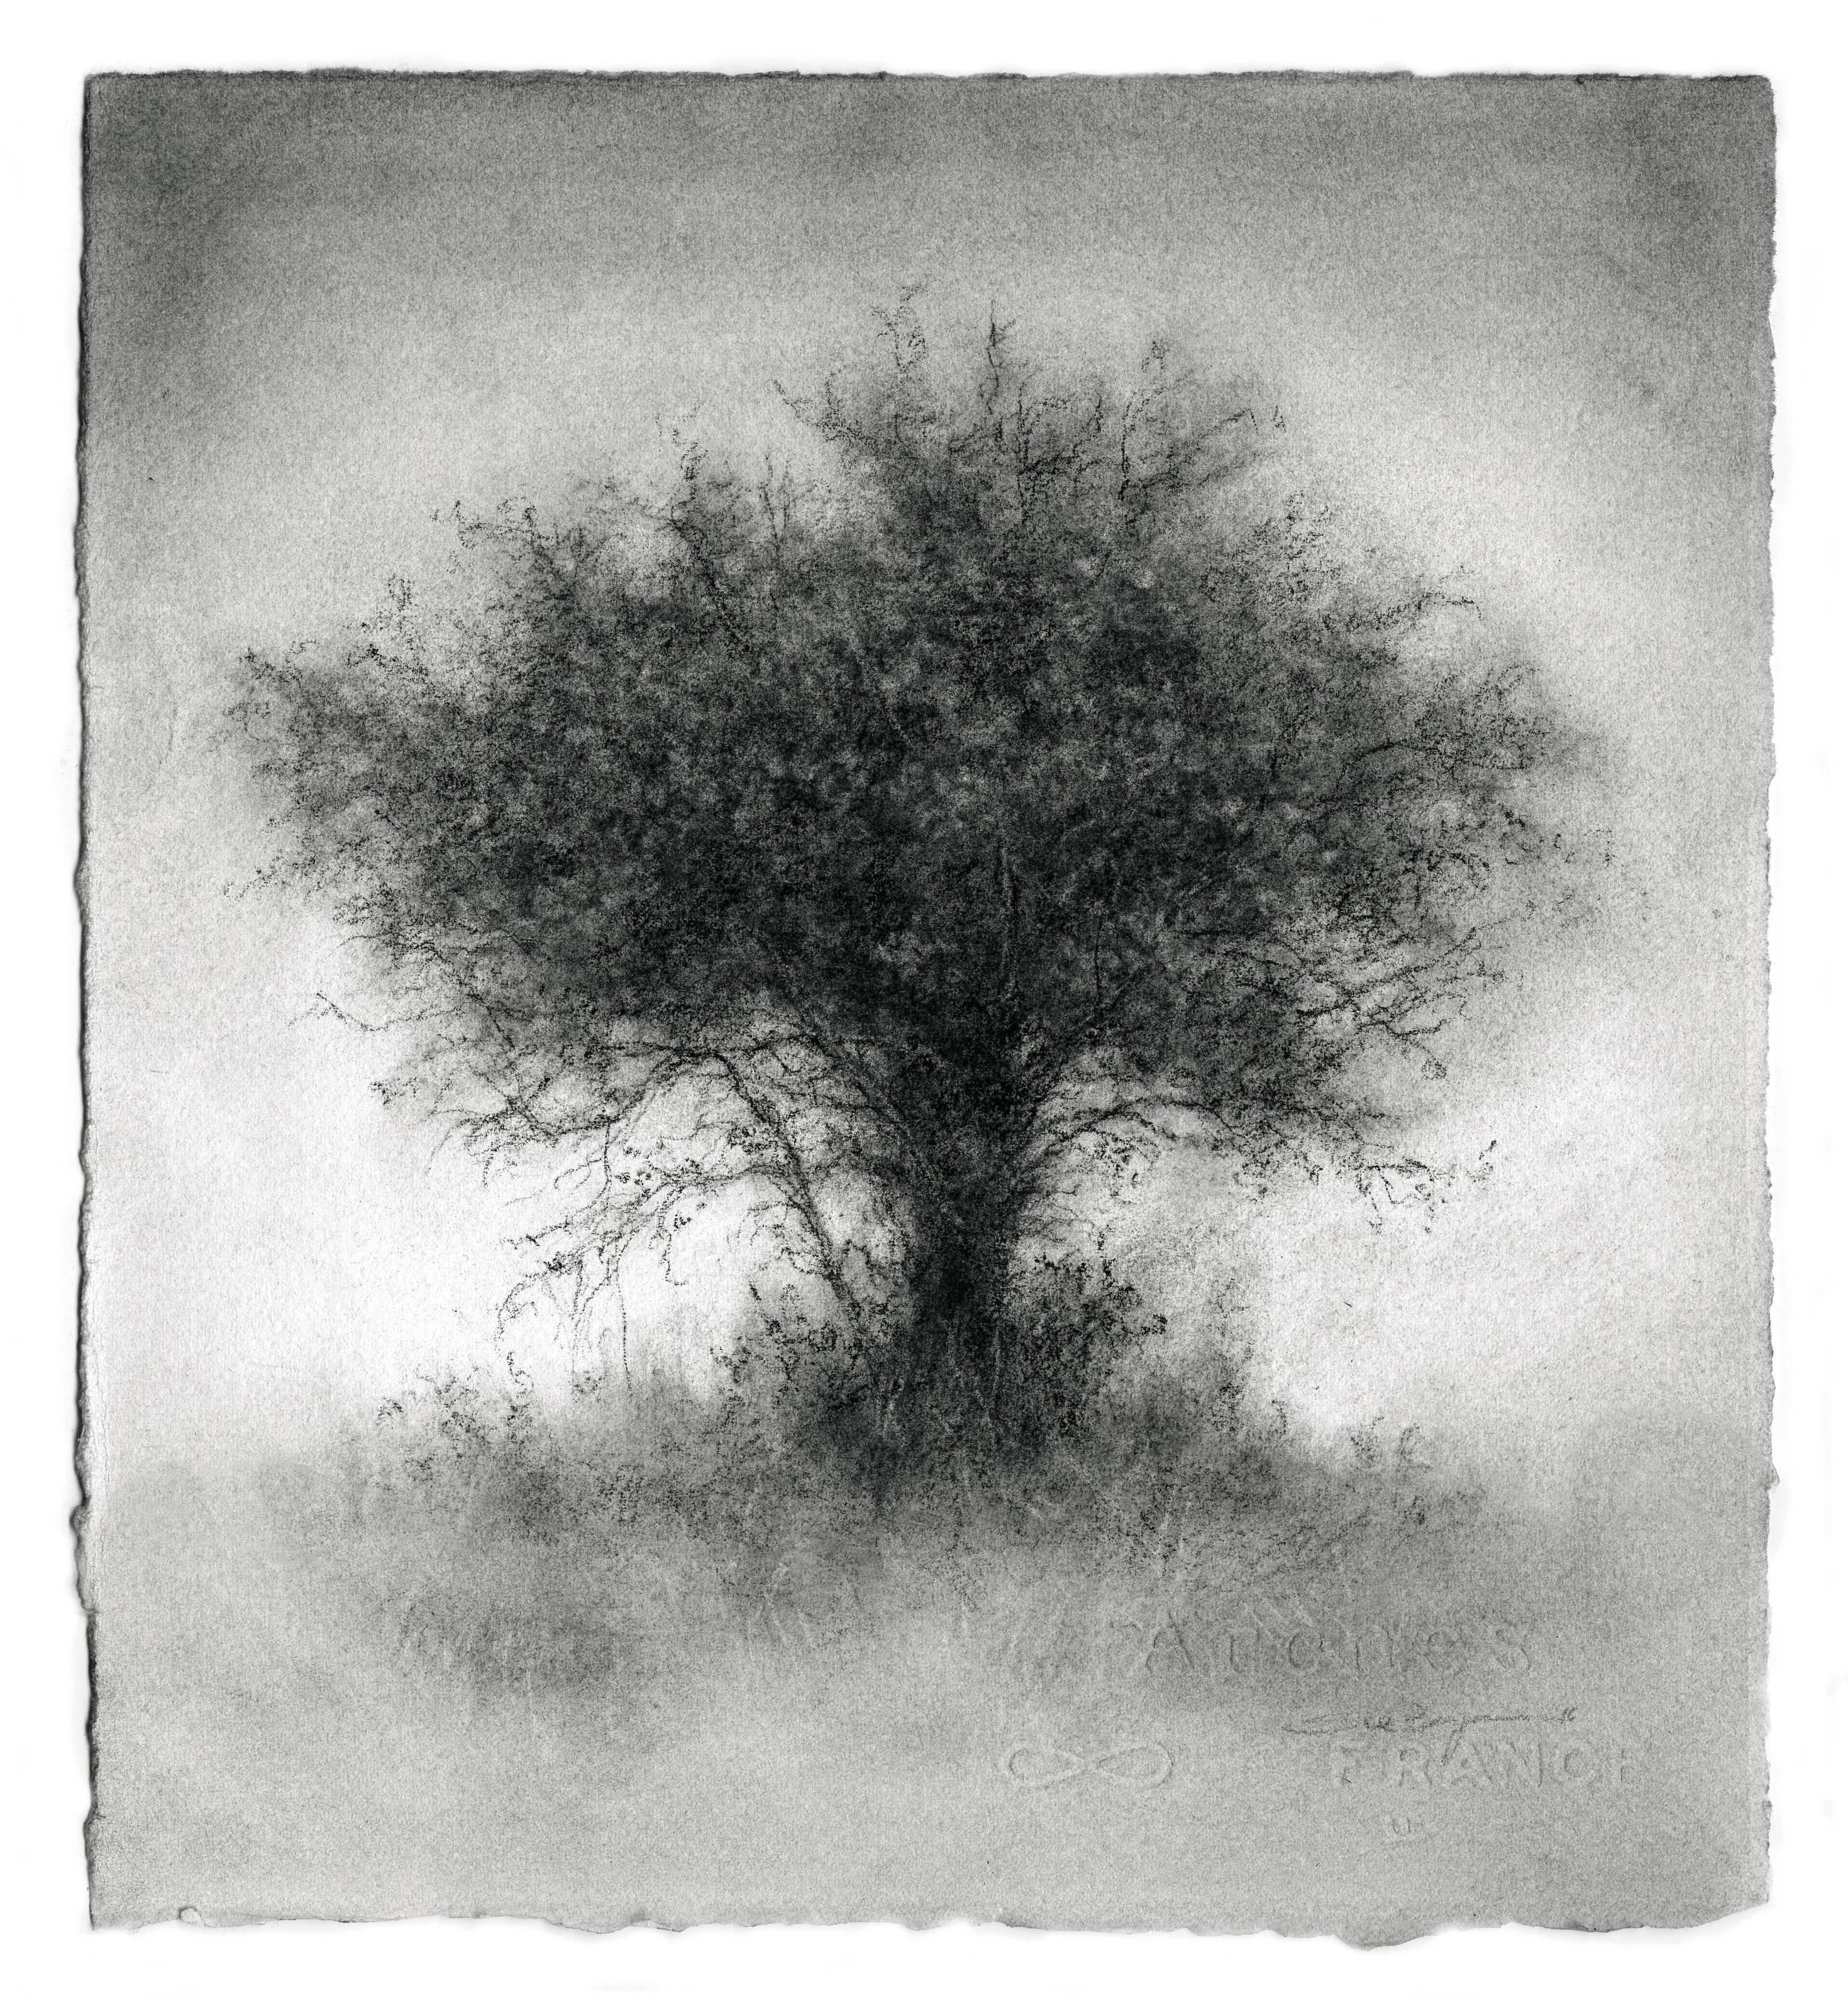 Sue Bryan Landscape Art - Elsewhere (Small Contemporary Charcoal Landscape Drawing of a Single Tree)